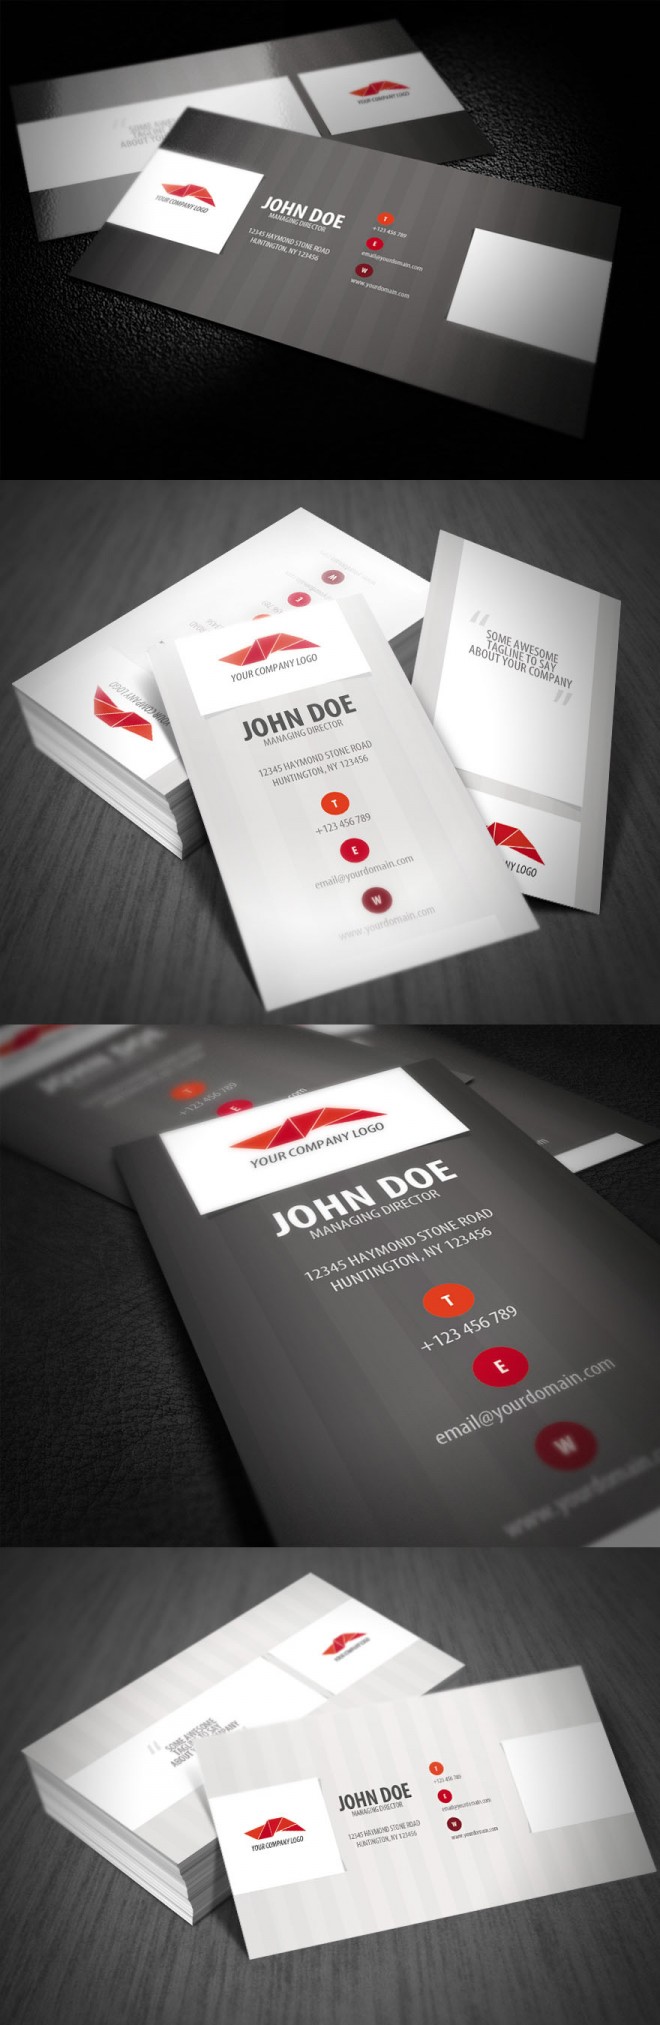 22-corporate-business-card-design.preview